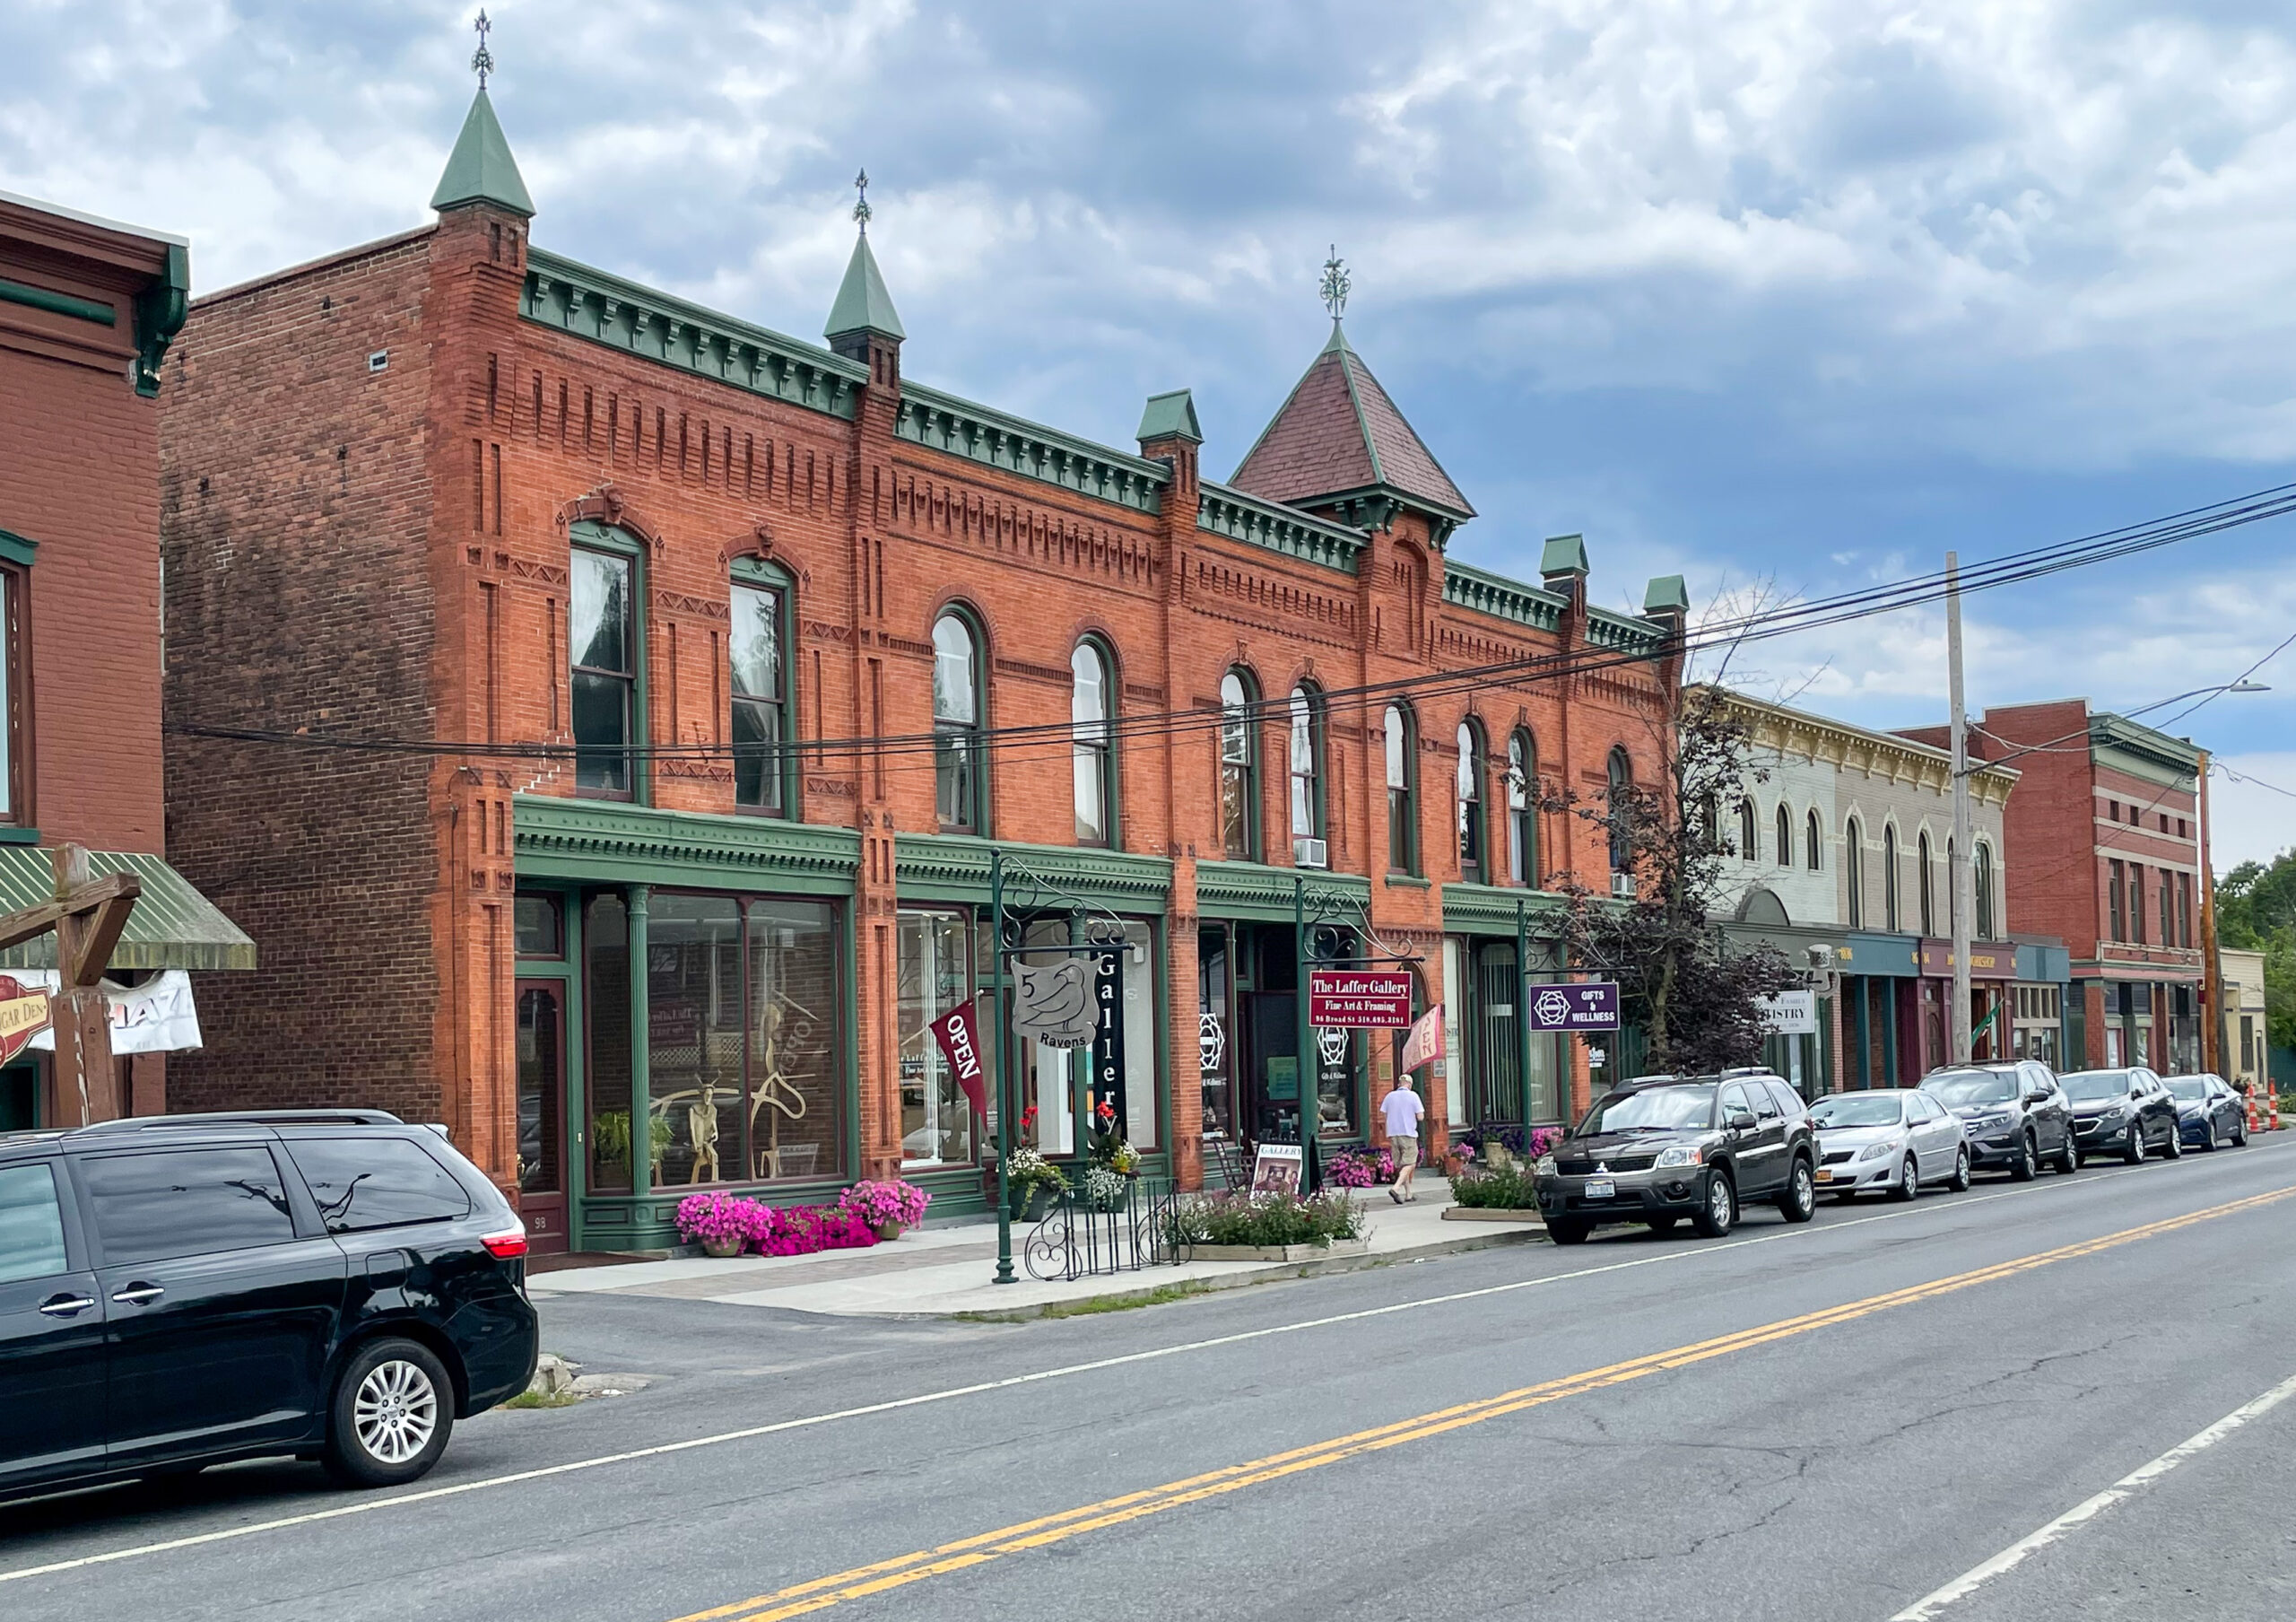 Village of Schuylerville - Top 5 Locations in New York State That Are Interesting to Explore